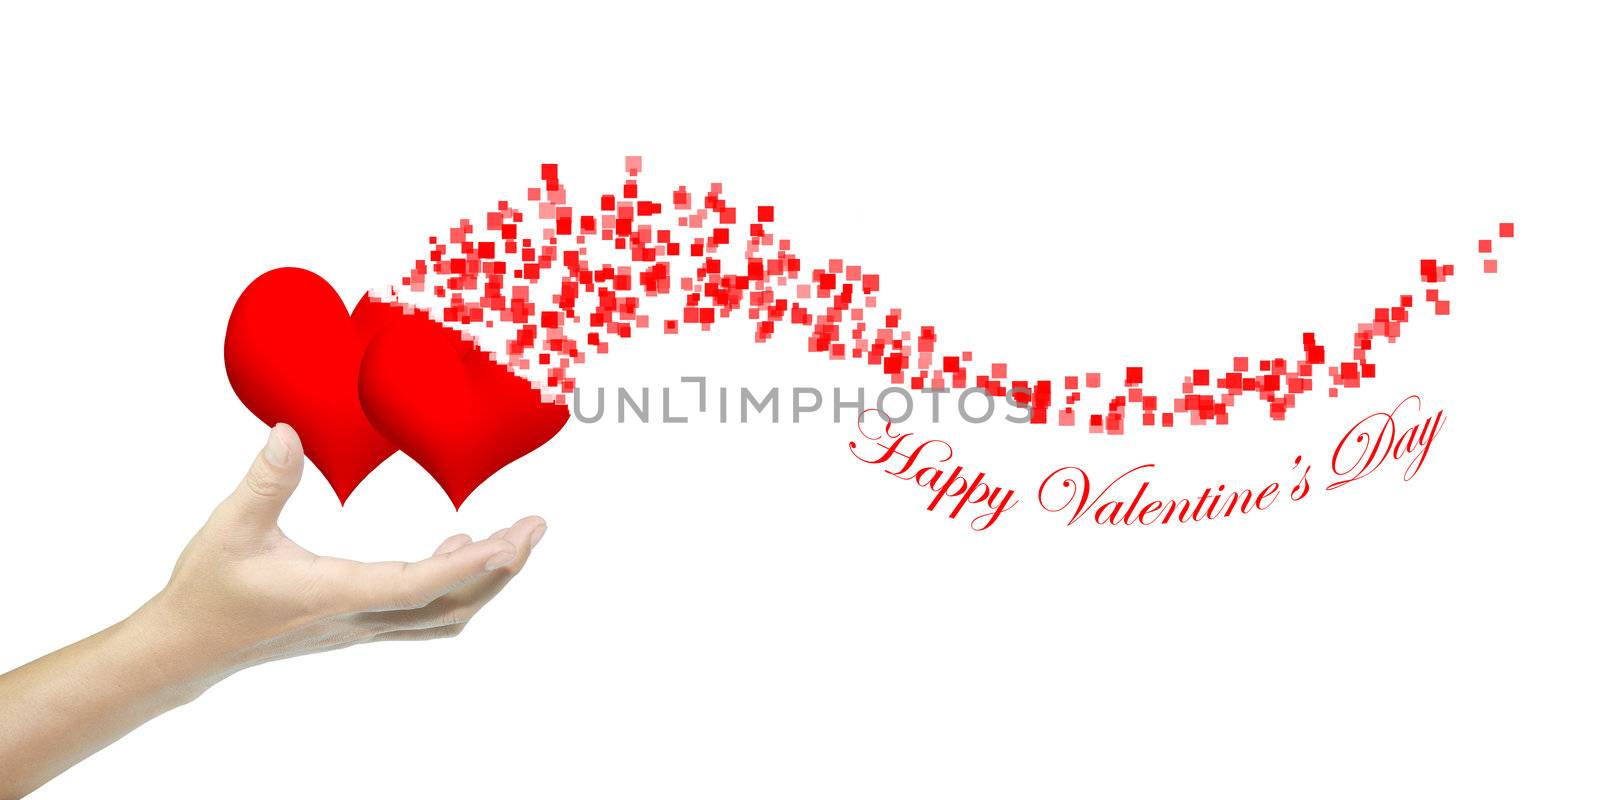 Hand hold heart as Valentine's day card